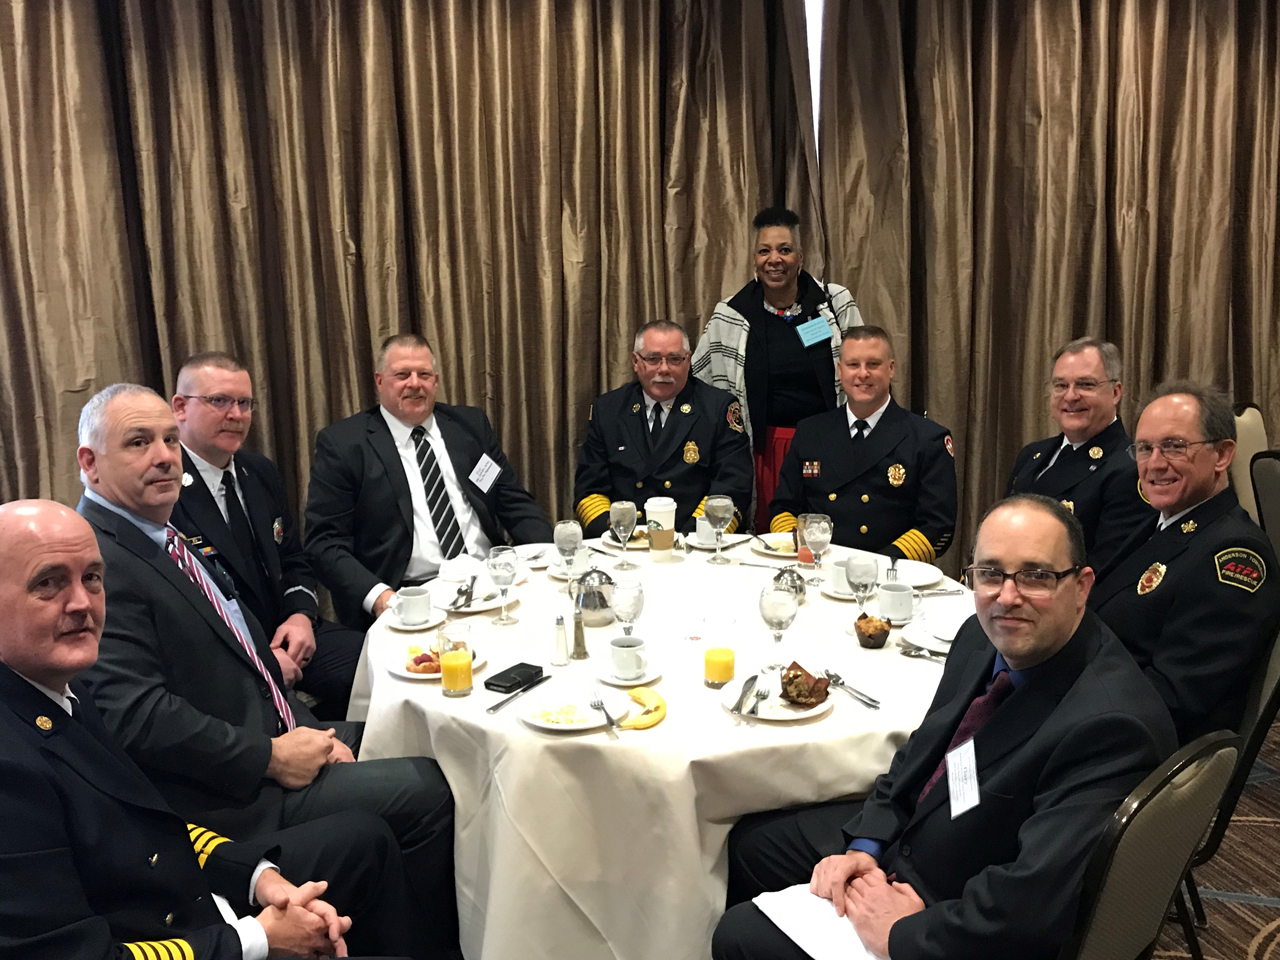 Rep. Ingram with local fire chiefs at the OFCA Legislative Breakfast